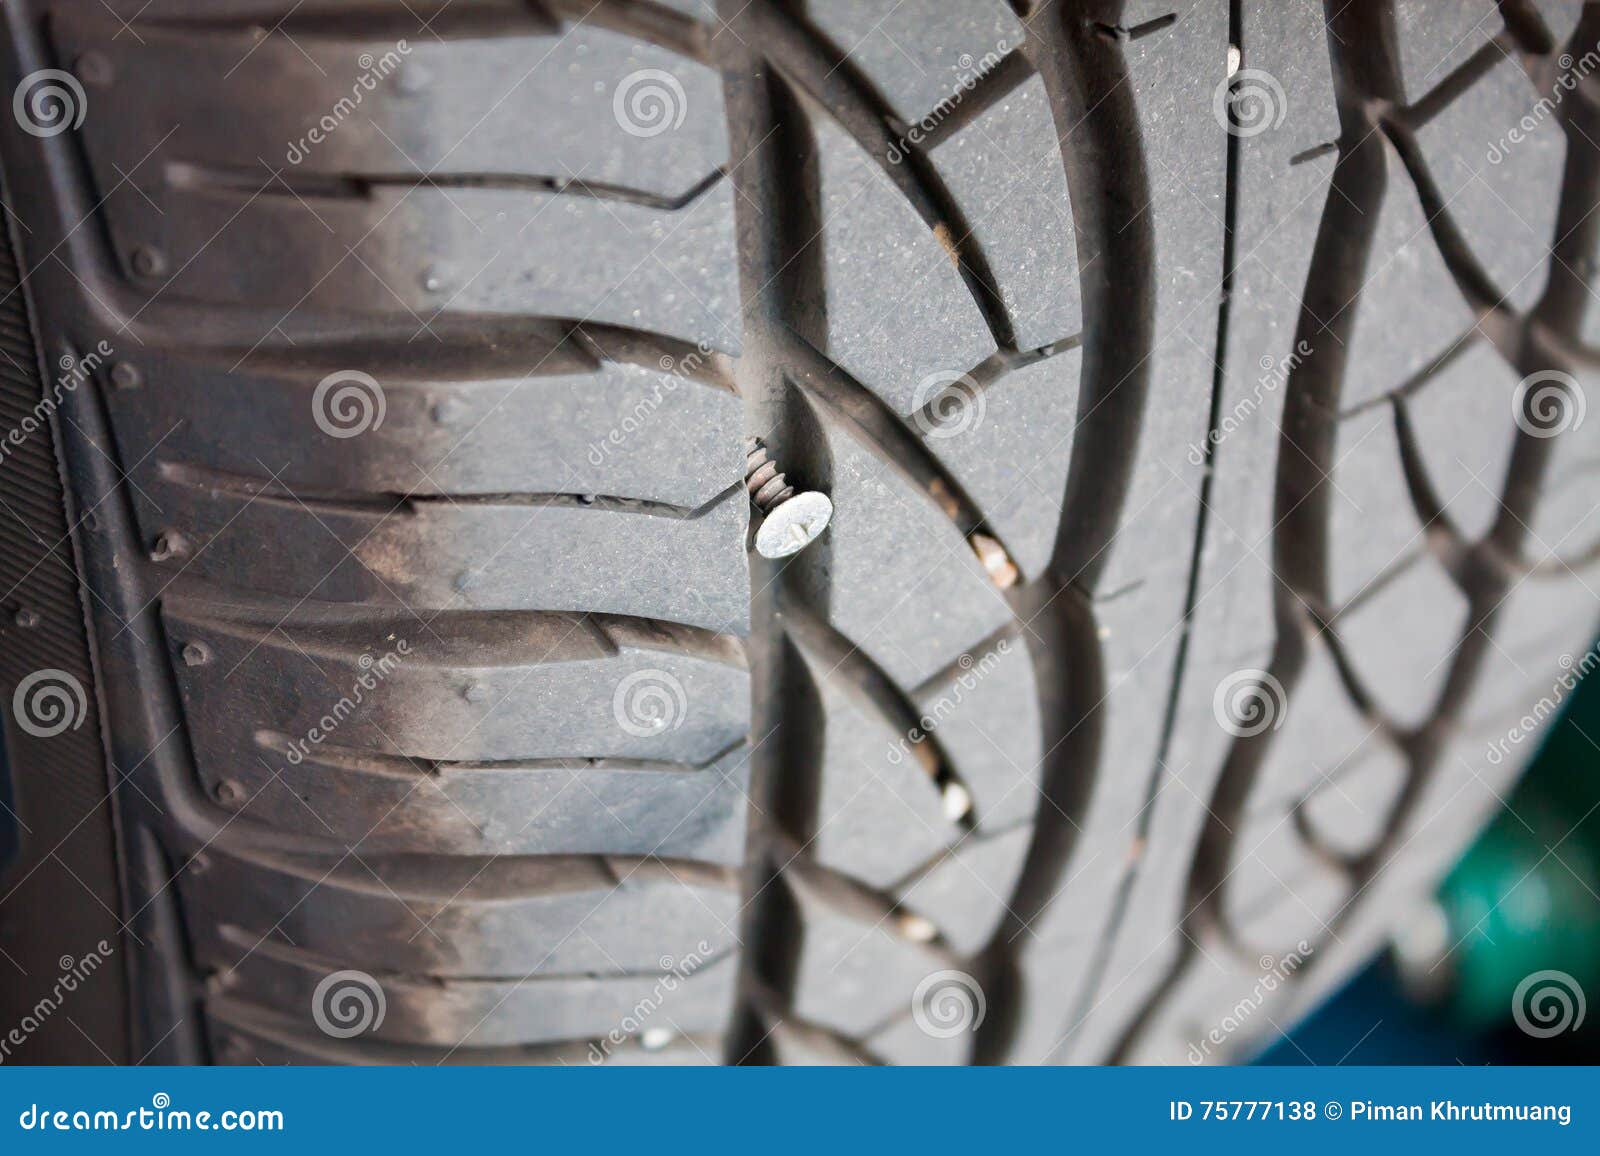 Metallic nail in car tyre stock photo. Image of spike - 75777138